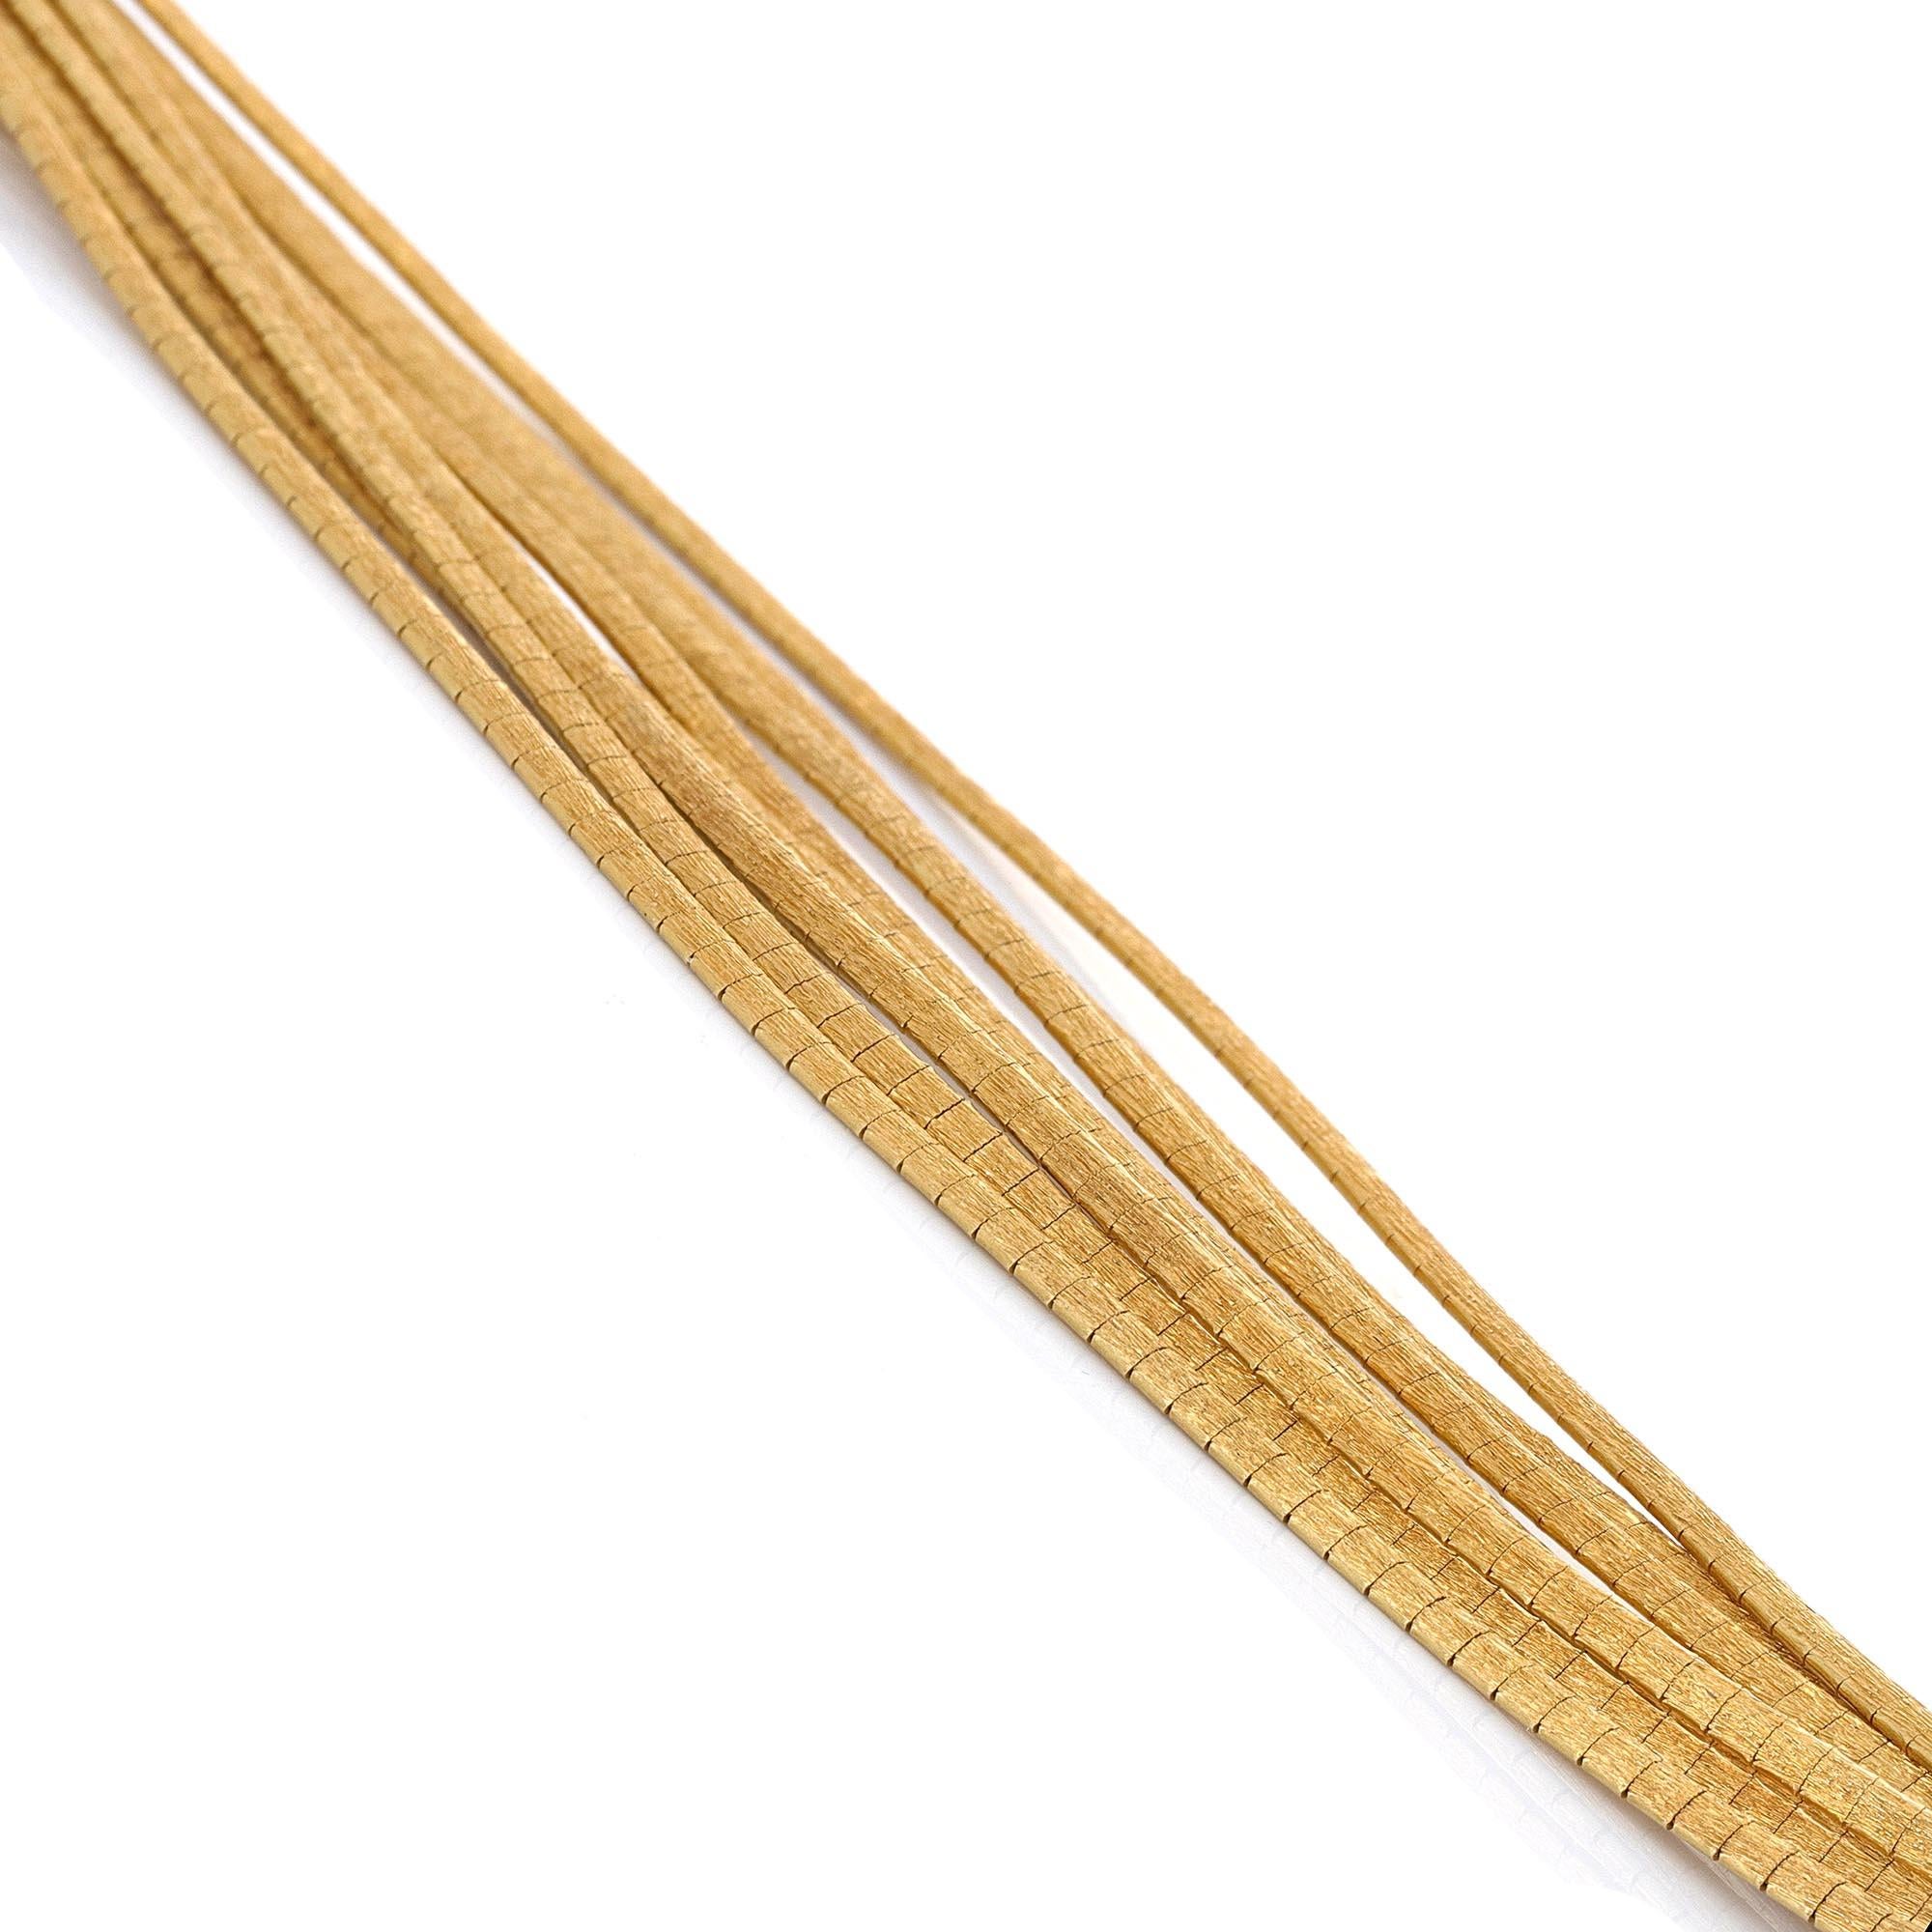 A vintage Italian multi-strand flexible spaghetti link bracelet crafted in 18 karat gold with a Florentine finish.
Florentine is decorative detailed work done by hand. Using engraving tools, cross hatch lines are engraved into the metal and is